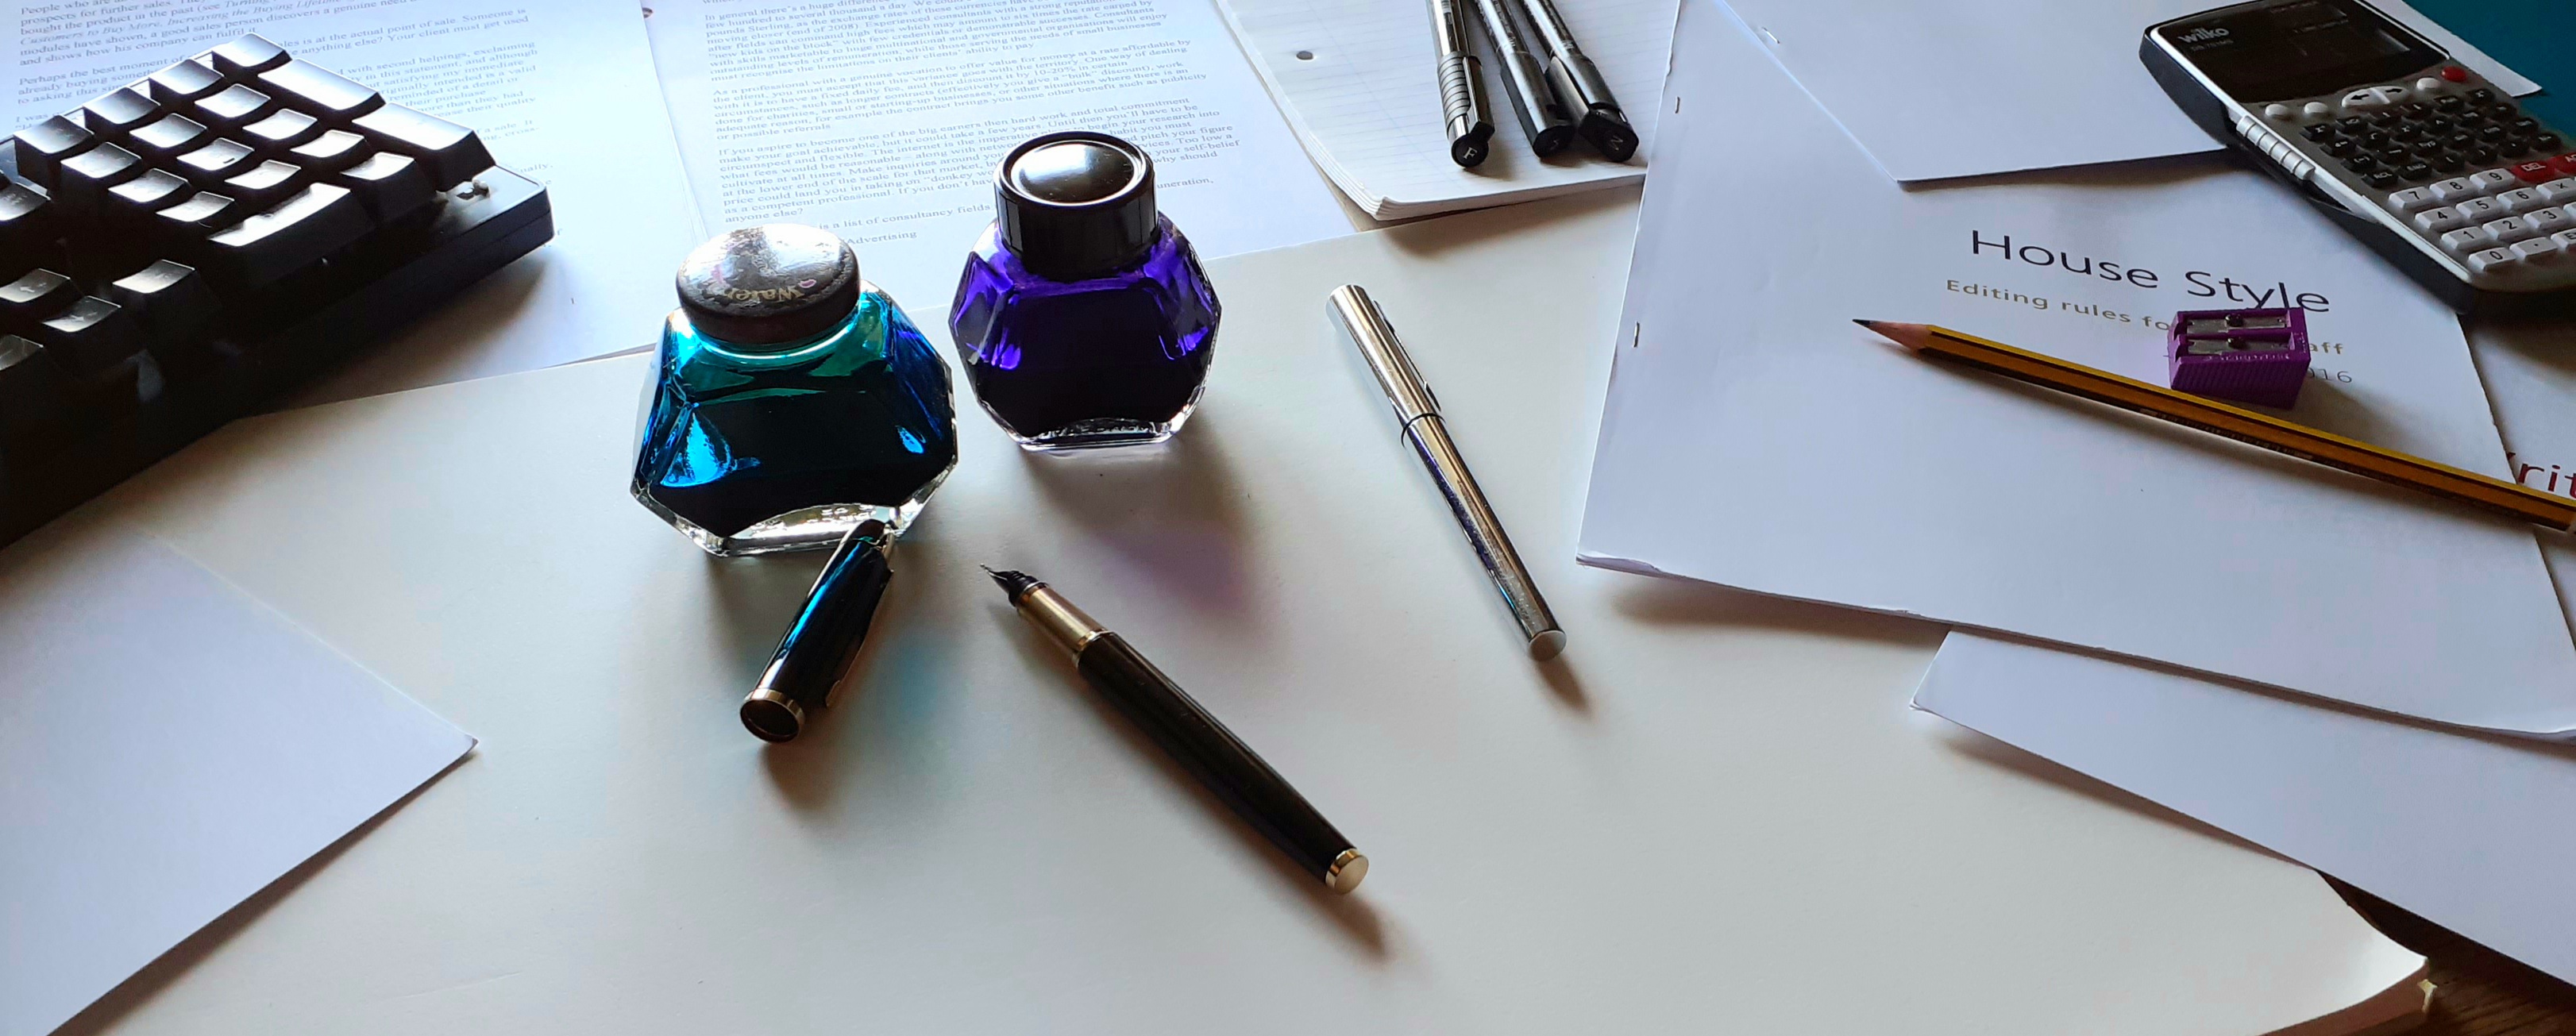 A desk with pens and ink bottles